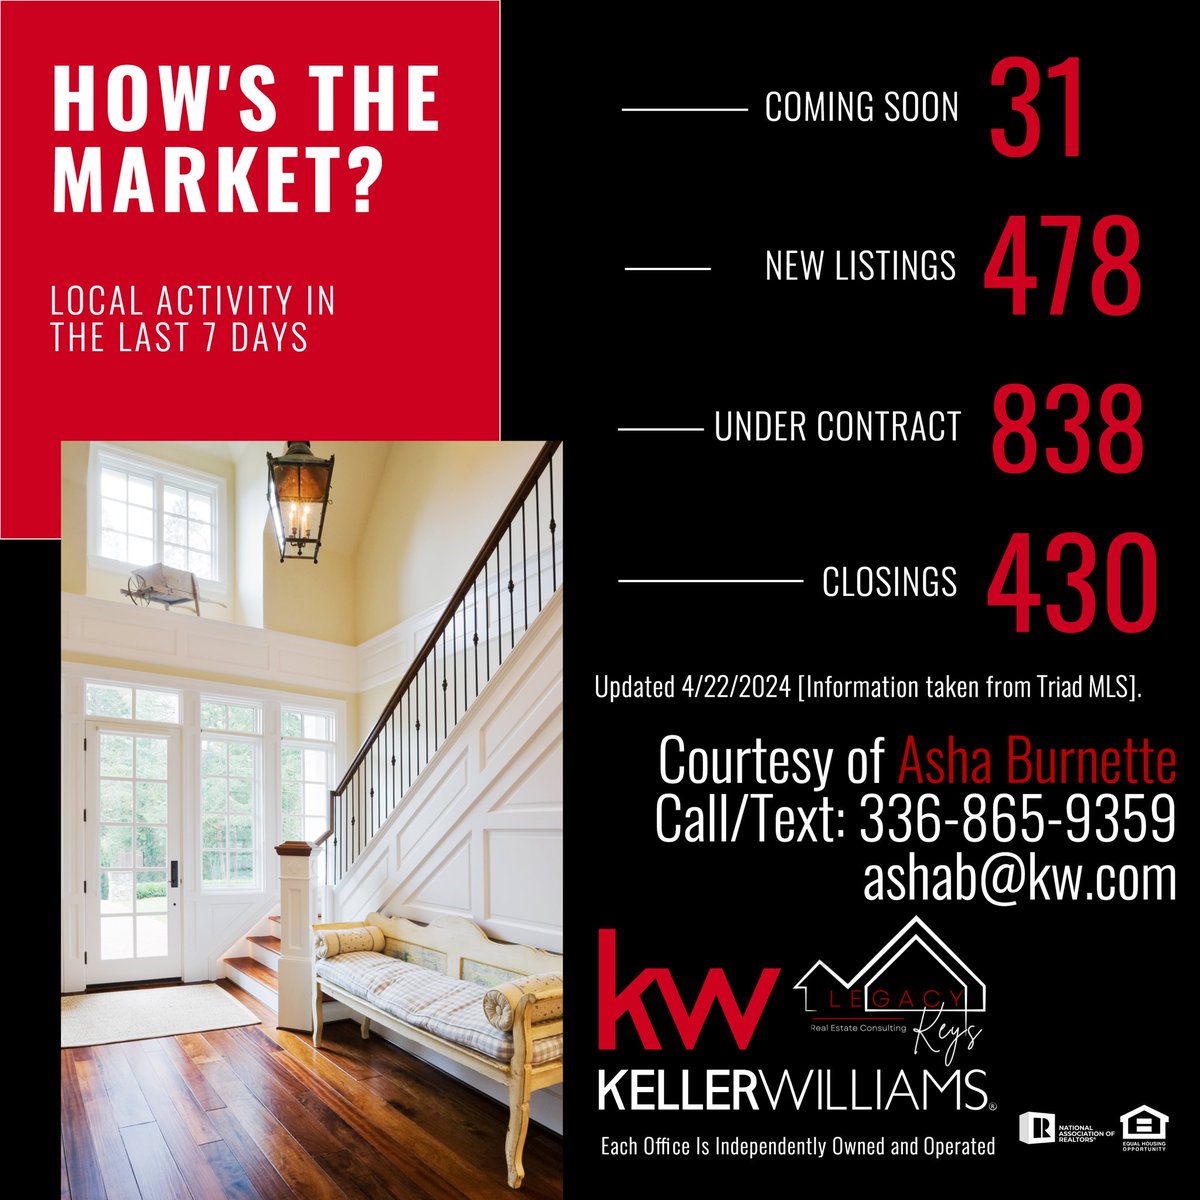 54 more homes for sale compared to last week. Take advantage of the prime selling time - NOW! 

#MarketUpdate #TriadNC #ListingAgent #ForSaleByOwner #SellersAgent #SpringMarket #Realtor #Relocation #HousingMarket #MovingToNC #Home